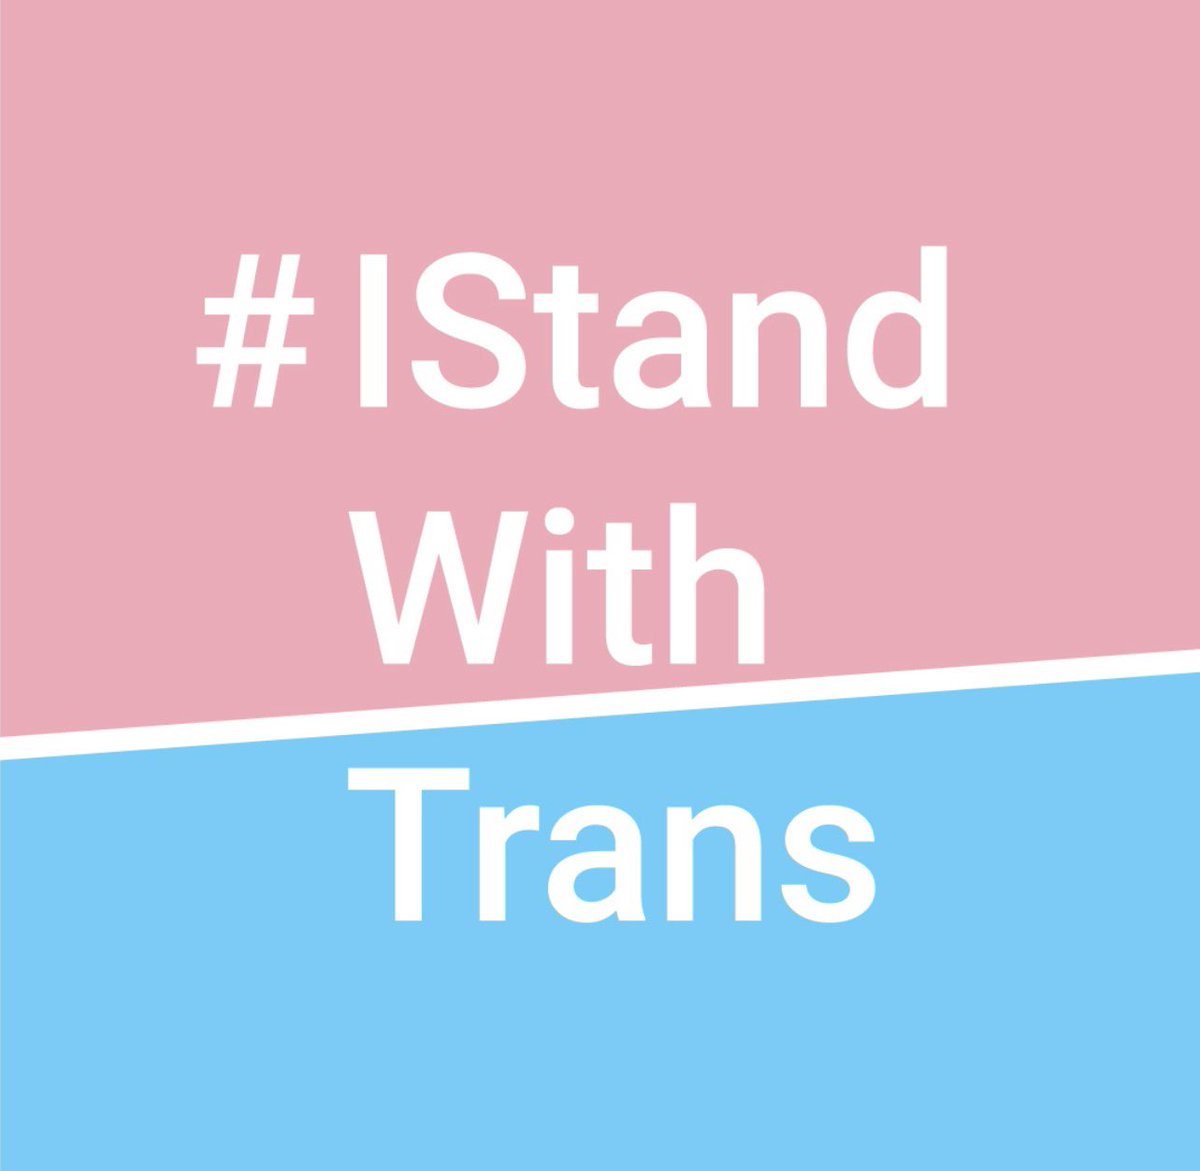 #TransDayOfVisibility   #IStandWithTrans as a #TransAlly as we all have a right to live freely and openly without fear.   🏳️‍⚧️🏳️‍🌈 #LGBTQ+ @TransITCUK @FreeBarLGBT @stonewalluk @ukblackpride @33BedfordRow